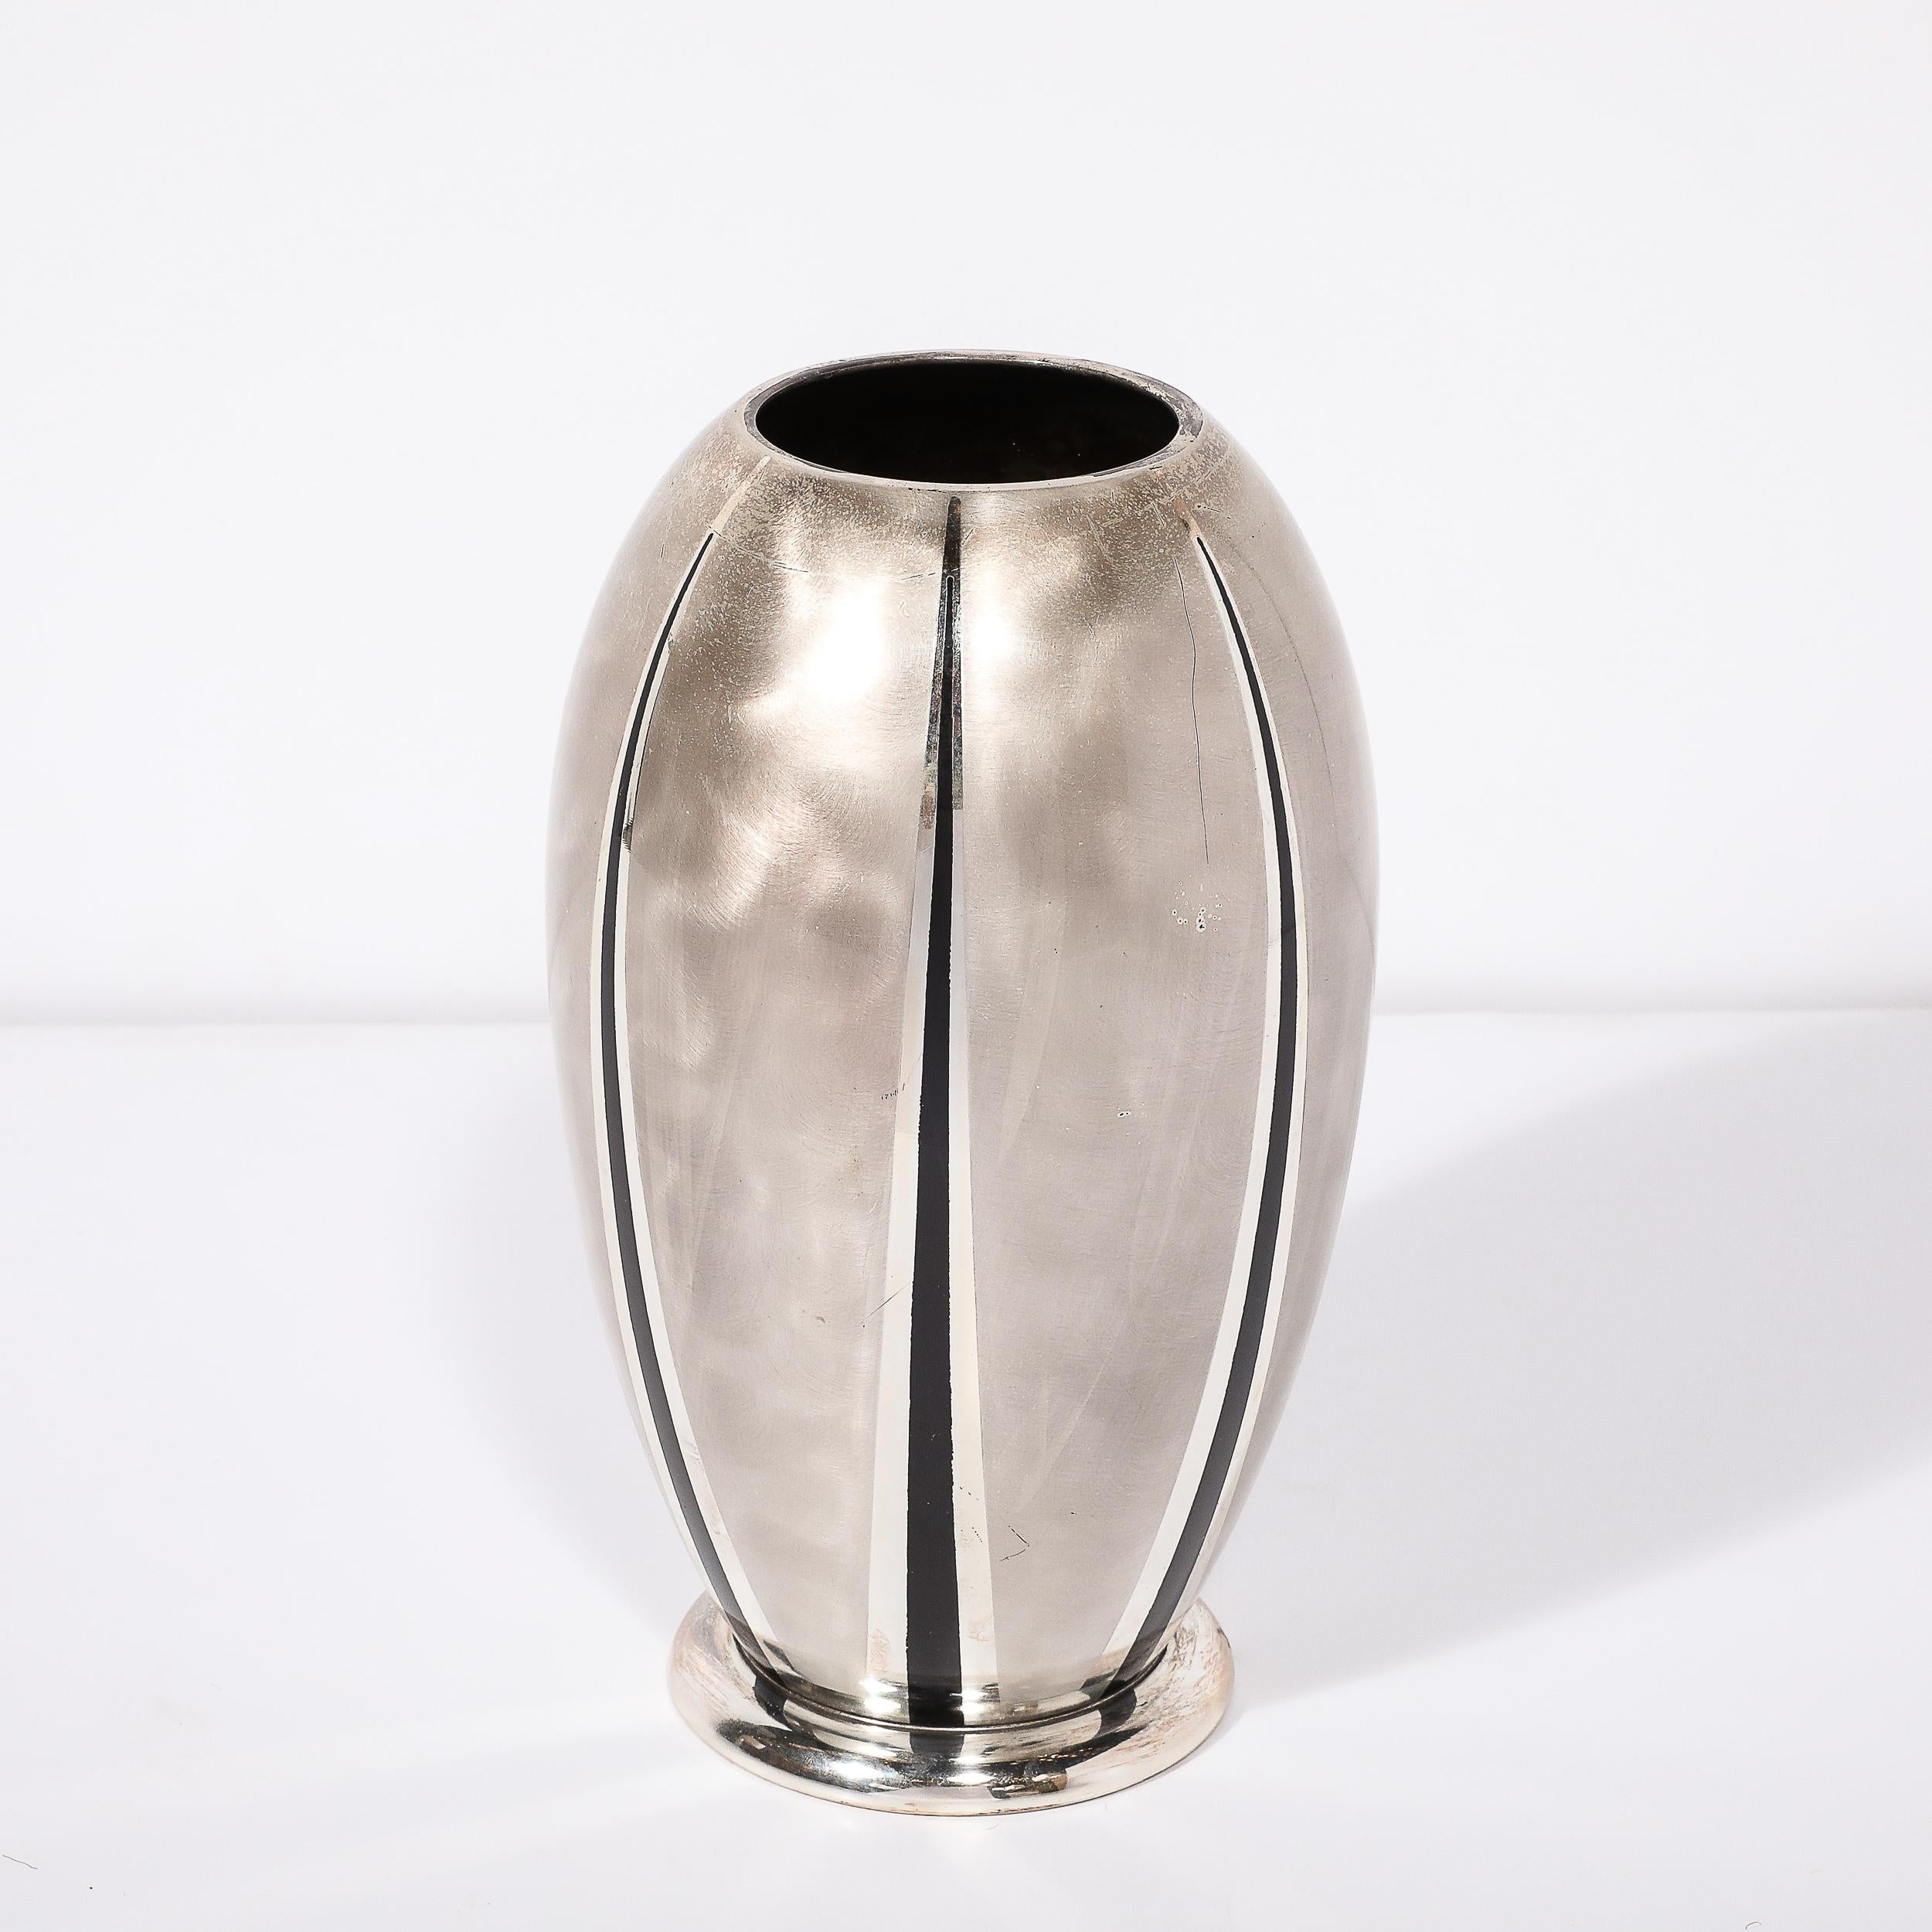 Mid-20th Century Art Deco WMF Ikora Textural Silver Plated Vase W/ Jet Black Linear Detailing For Sale